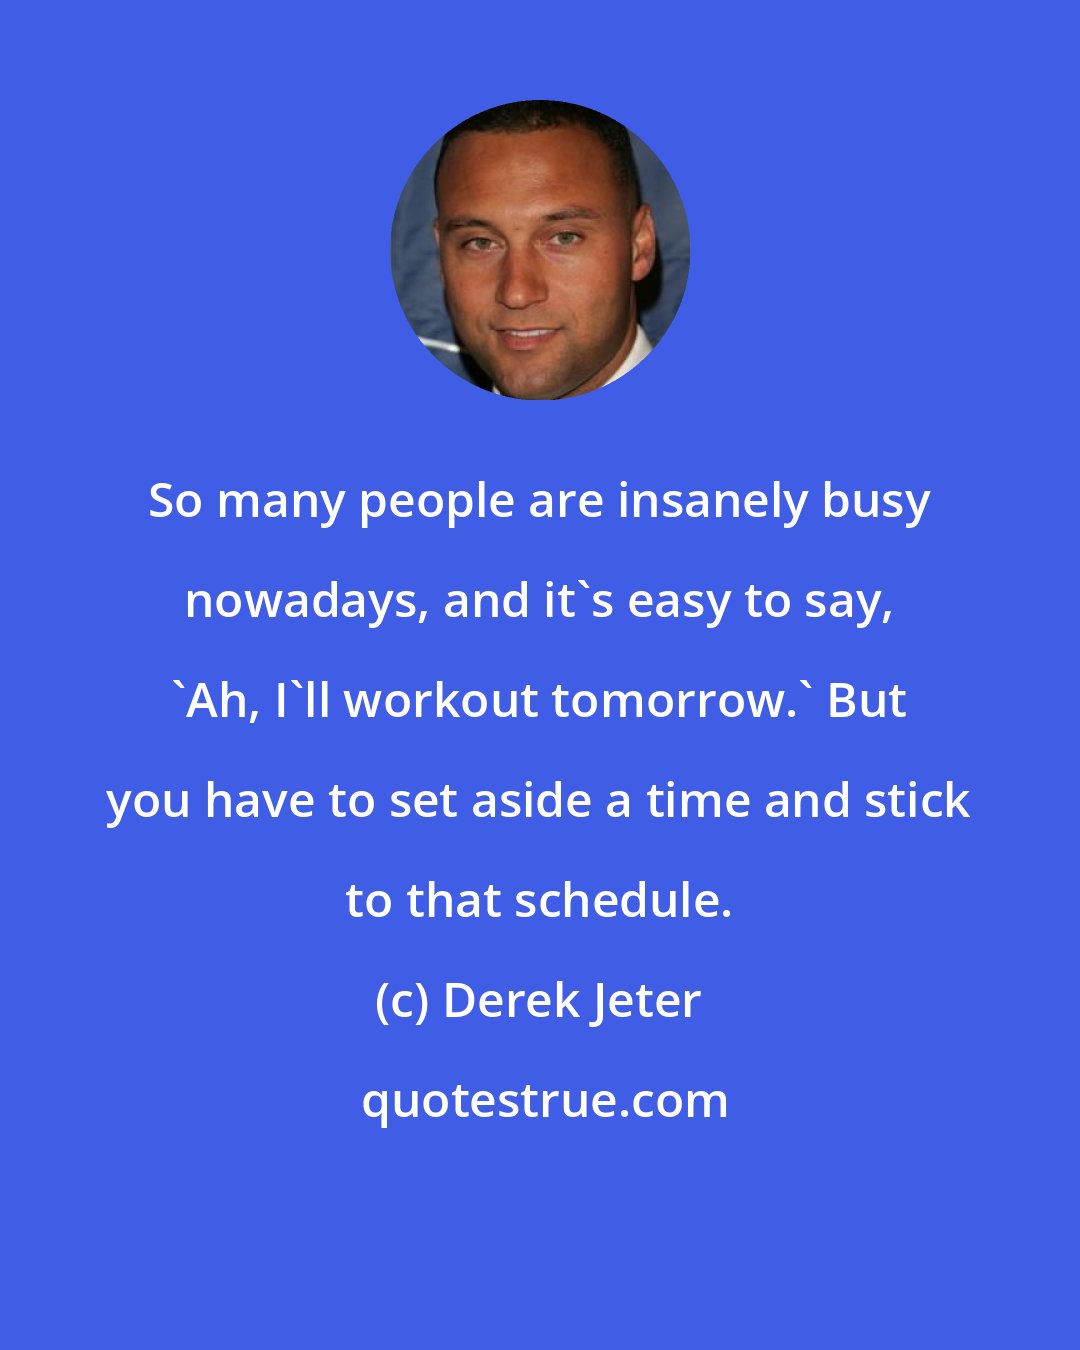 Derek Jeter: So many people are insanely busy nowadays, and it's easy to say, 'Ah, I'll workout tomorrow.' But you have to set aside a time and stick to that schedule.